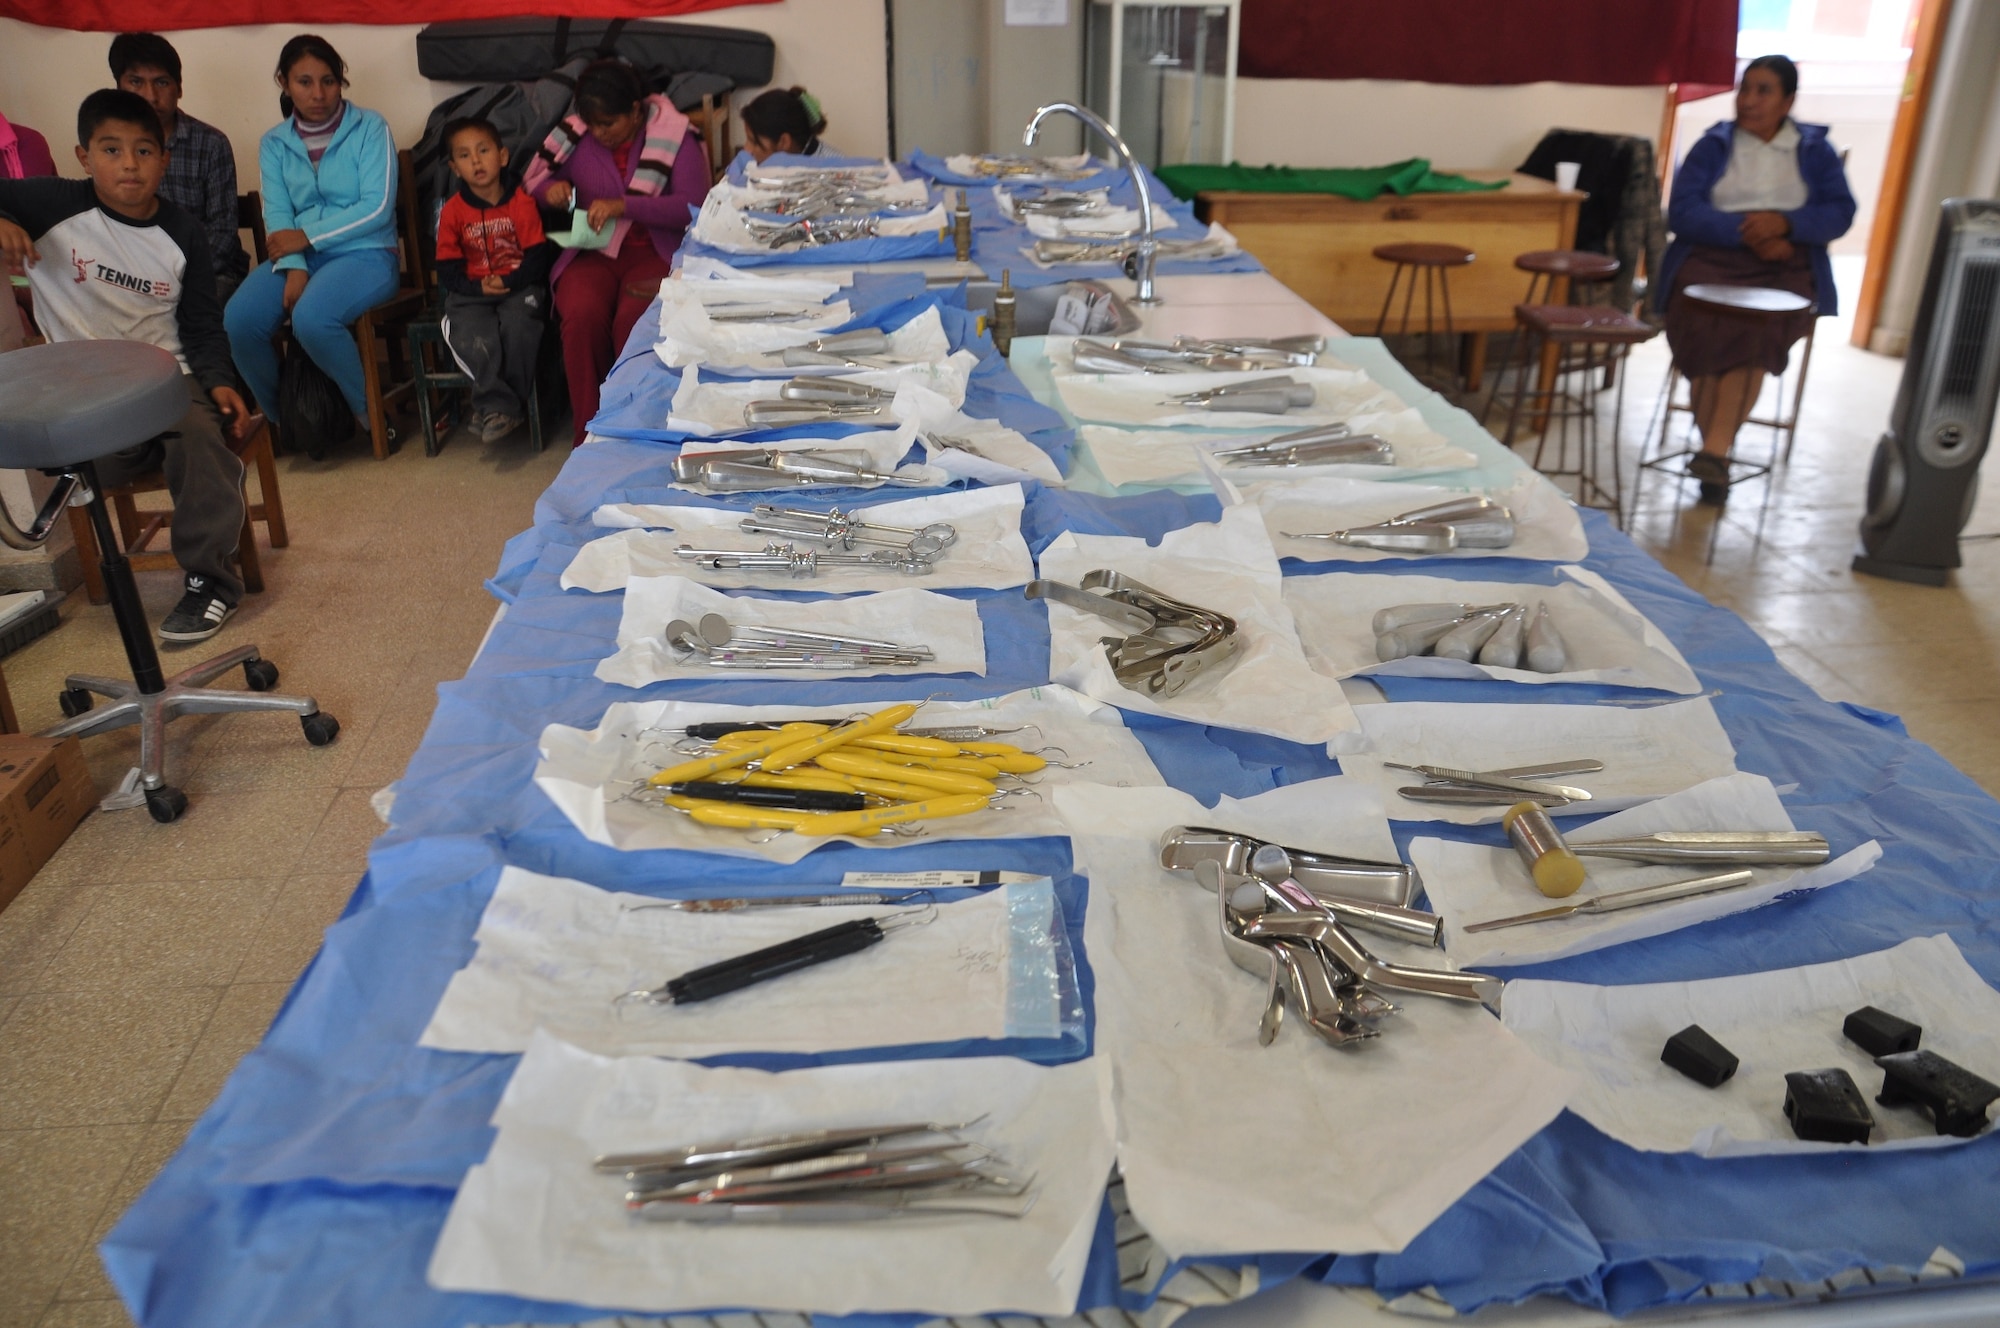 SAN CLEMENTE, Peru—Dental tools and patients wait for their turn June 21 during the first medical readiness and training exercise offered in the area as part of New Horizons, a U.S. Southern Command-sponsored humanitarian assistance and training exercise that takes place annually in Latin American and Caribbean countries. New Horizons Peru affords Air Force medical personnel the opportunity to hone their skills and train alongside their Peruvian military counterparts. As part of New Horizons Peru, U.S. and Peruvian medics are planning to provide free medical care to about 30,000 Peruvians for communities in need. (U.S. Air Force photo by Capt. Candace N. Park/released)